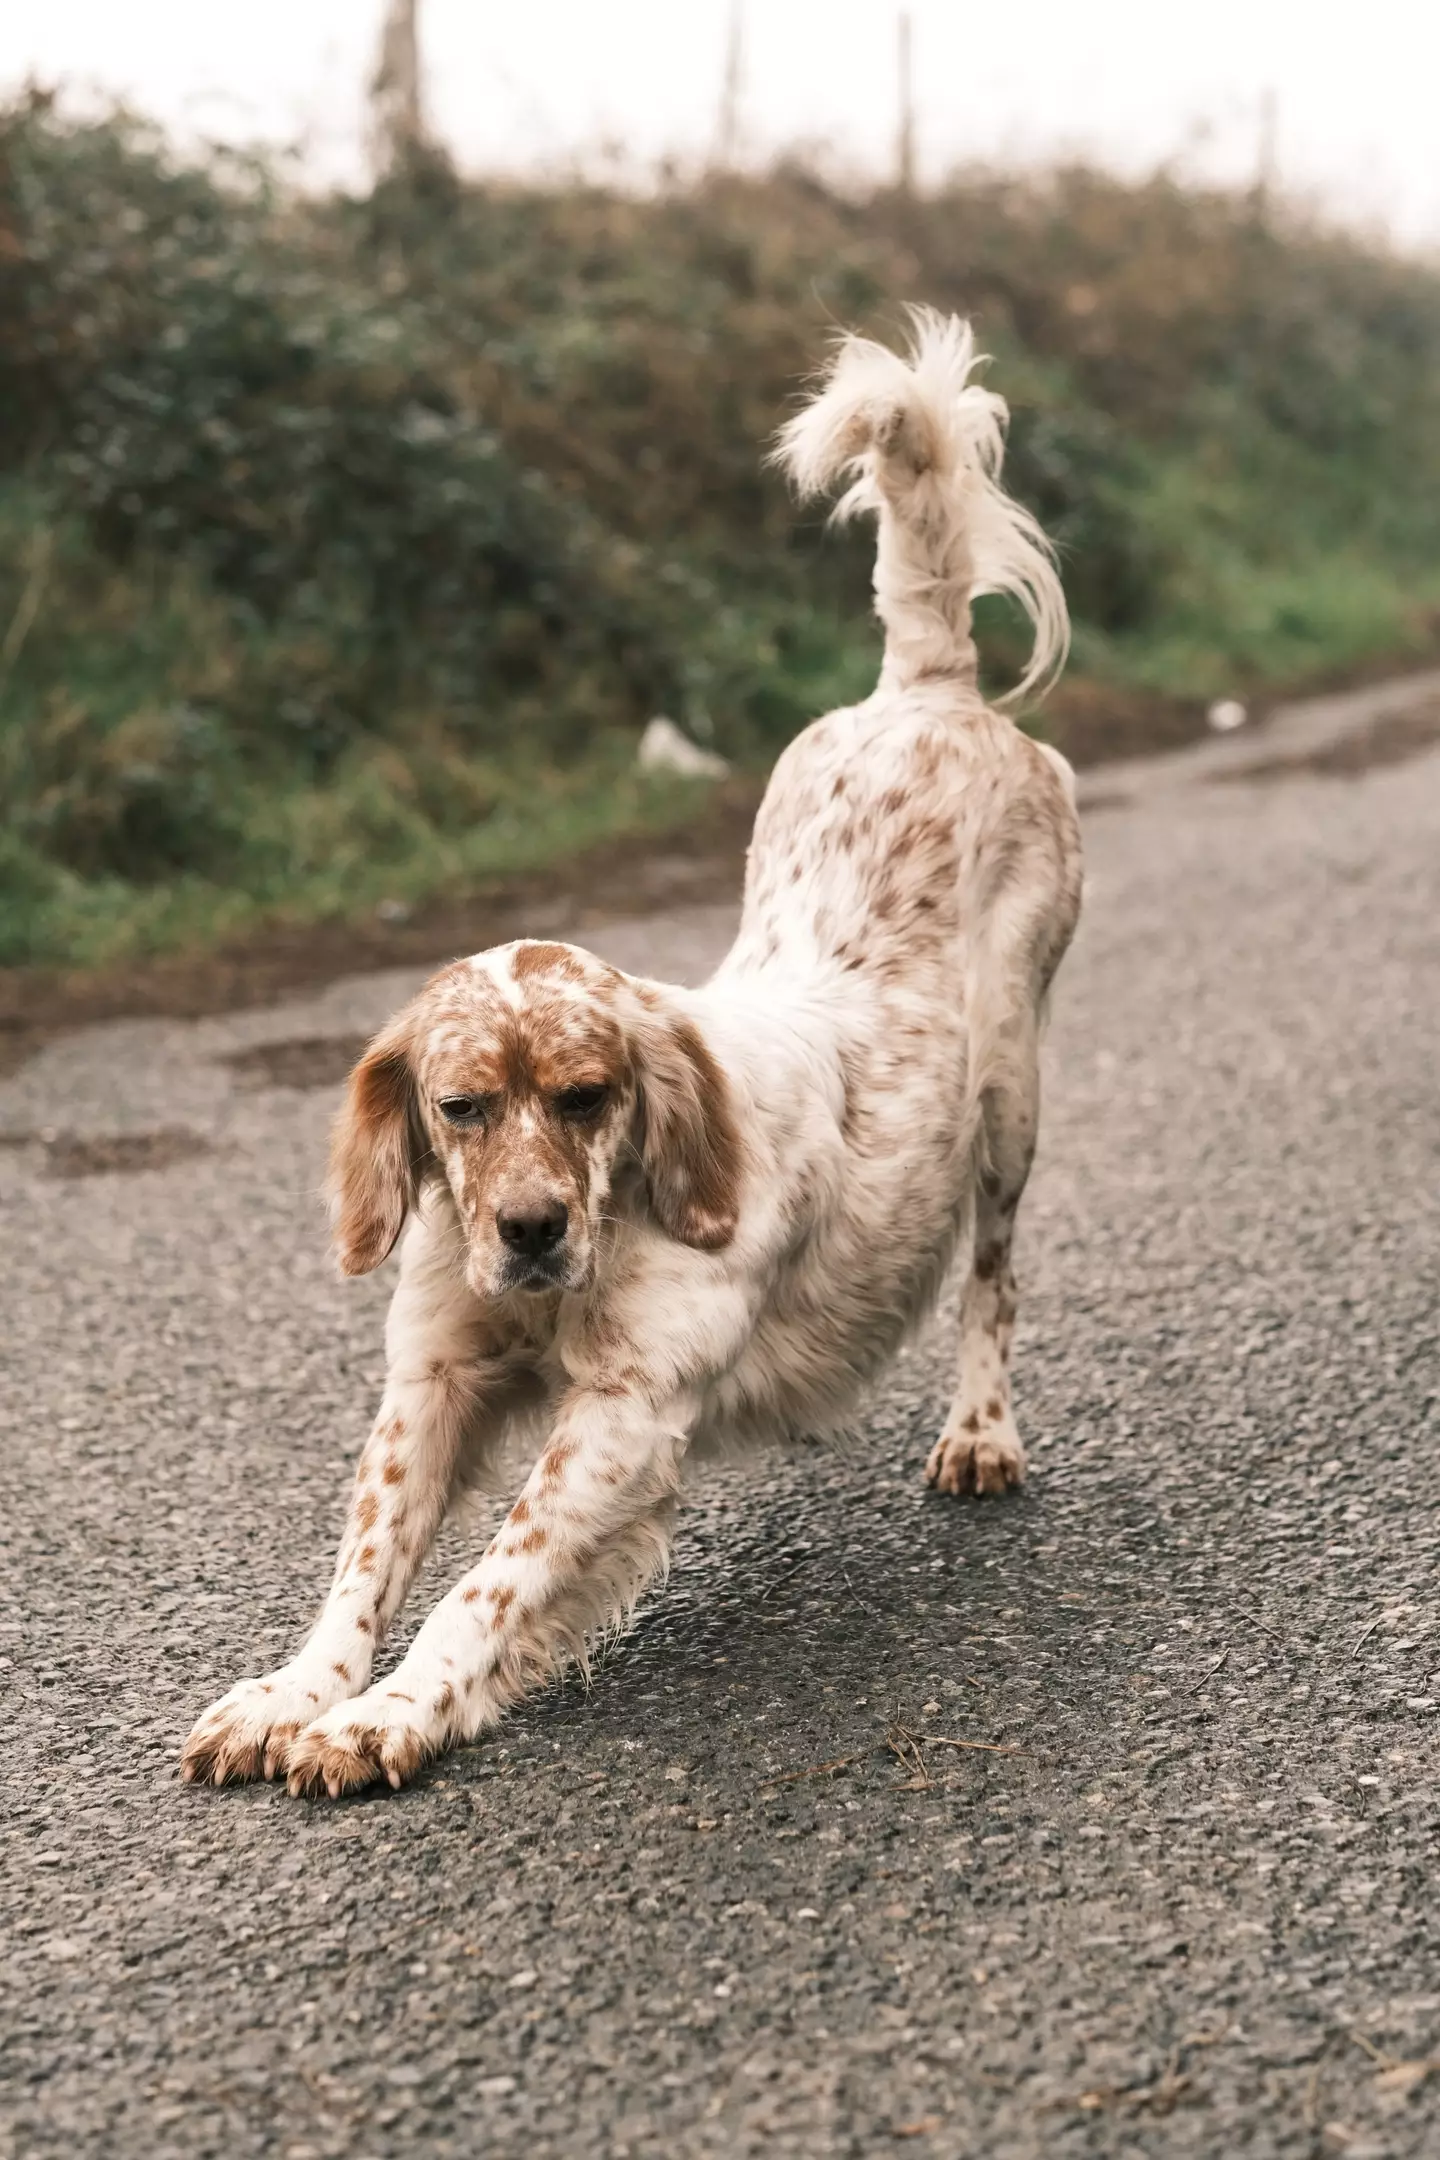 A pet owner has issued an urgent warning to others about the ‘big stretch’, whereby dogs stretch forwards in the ‘downward dog’-style yoga pose.